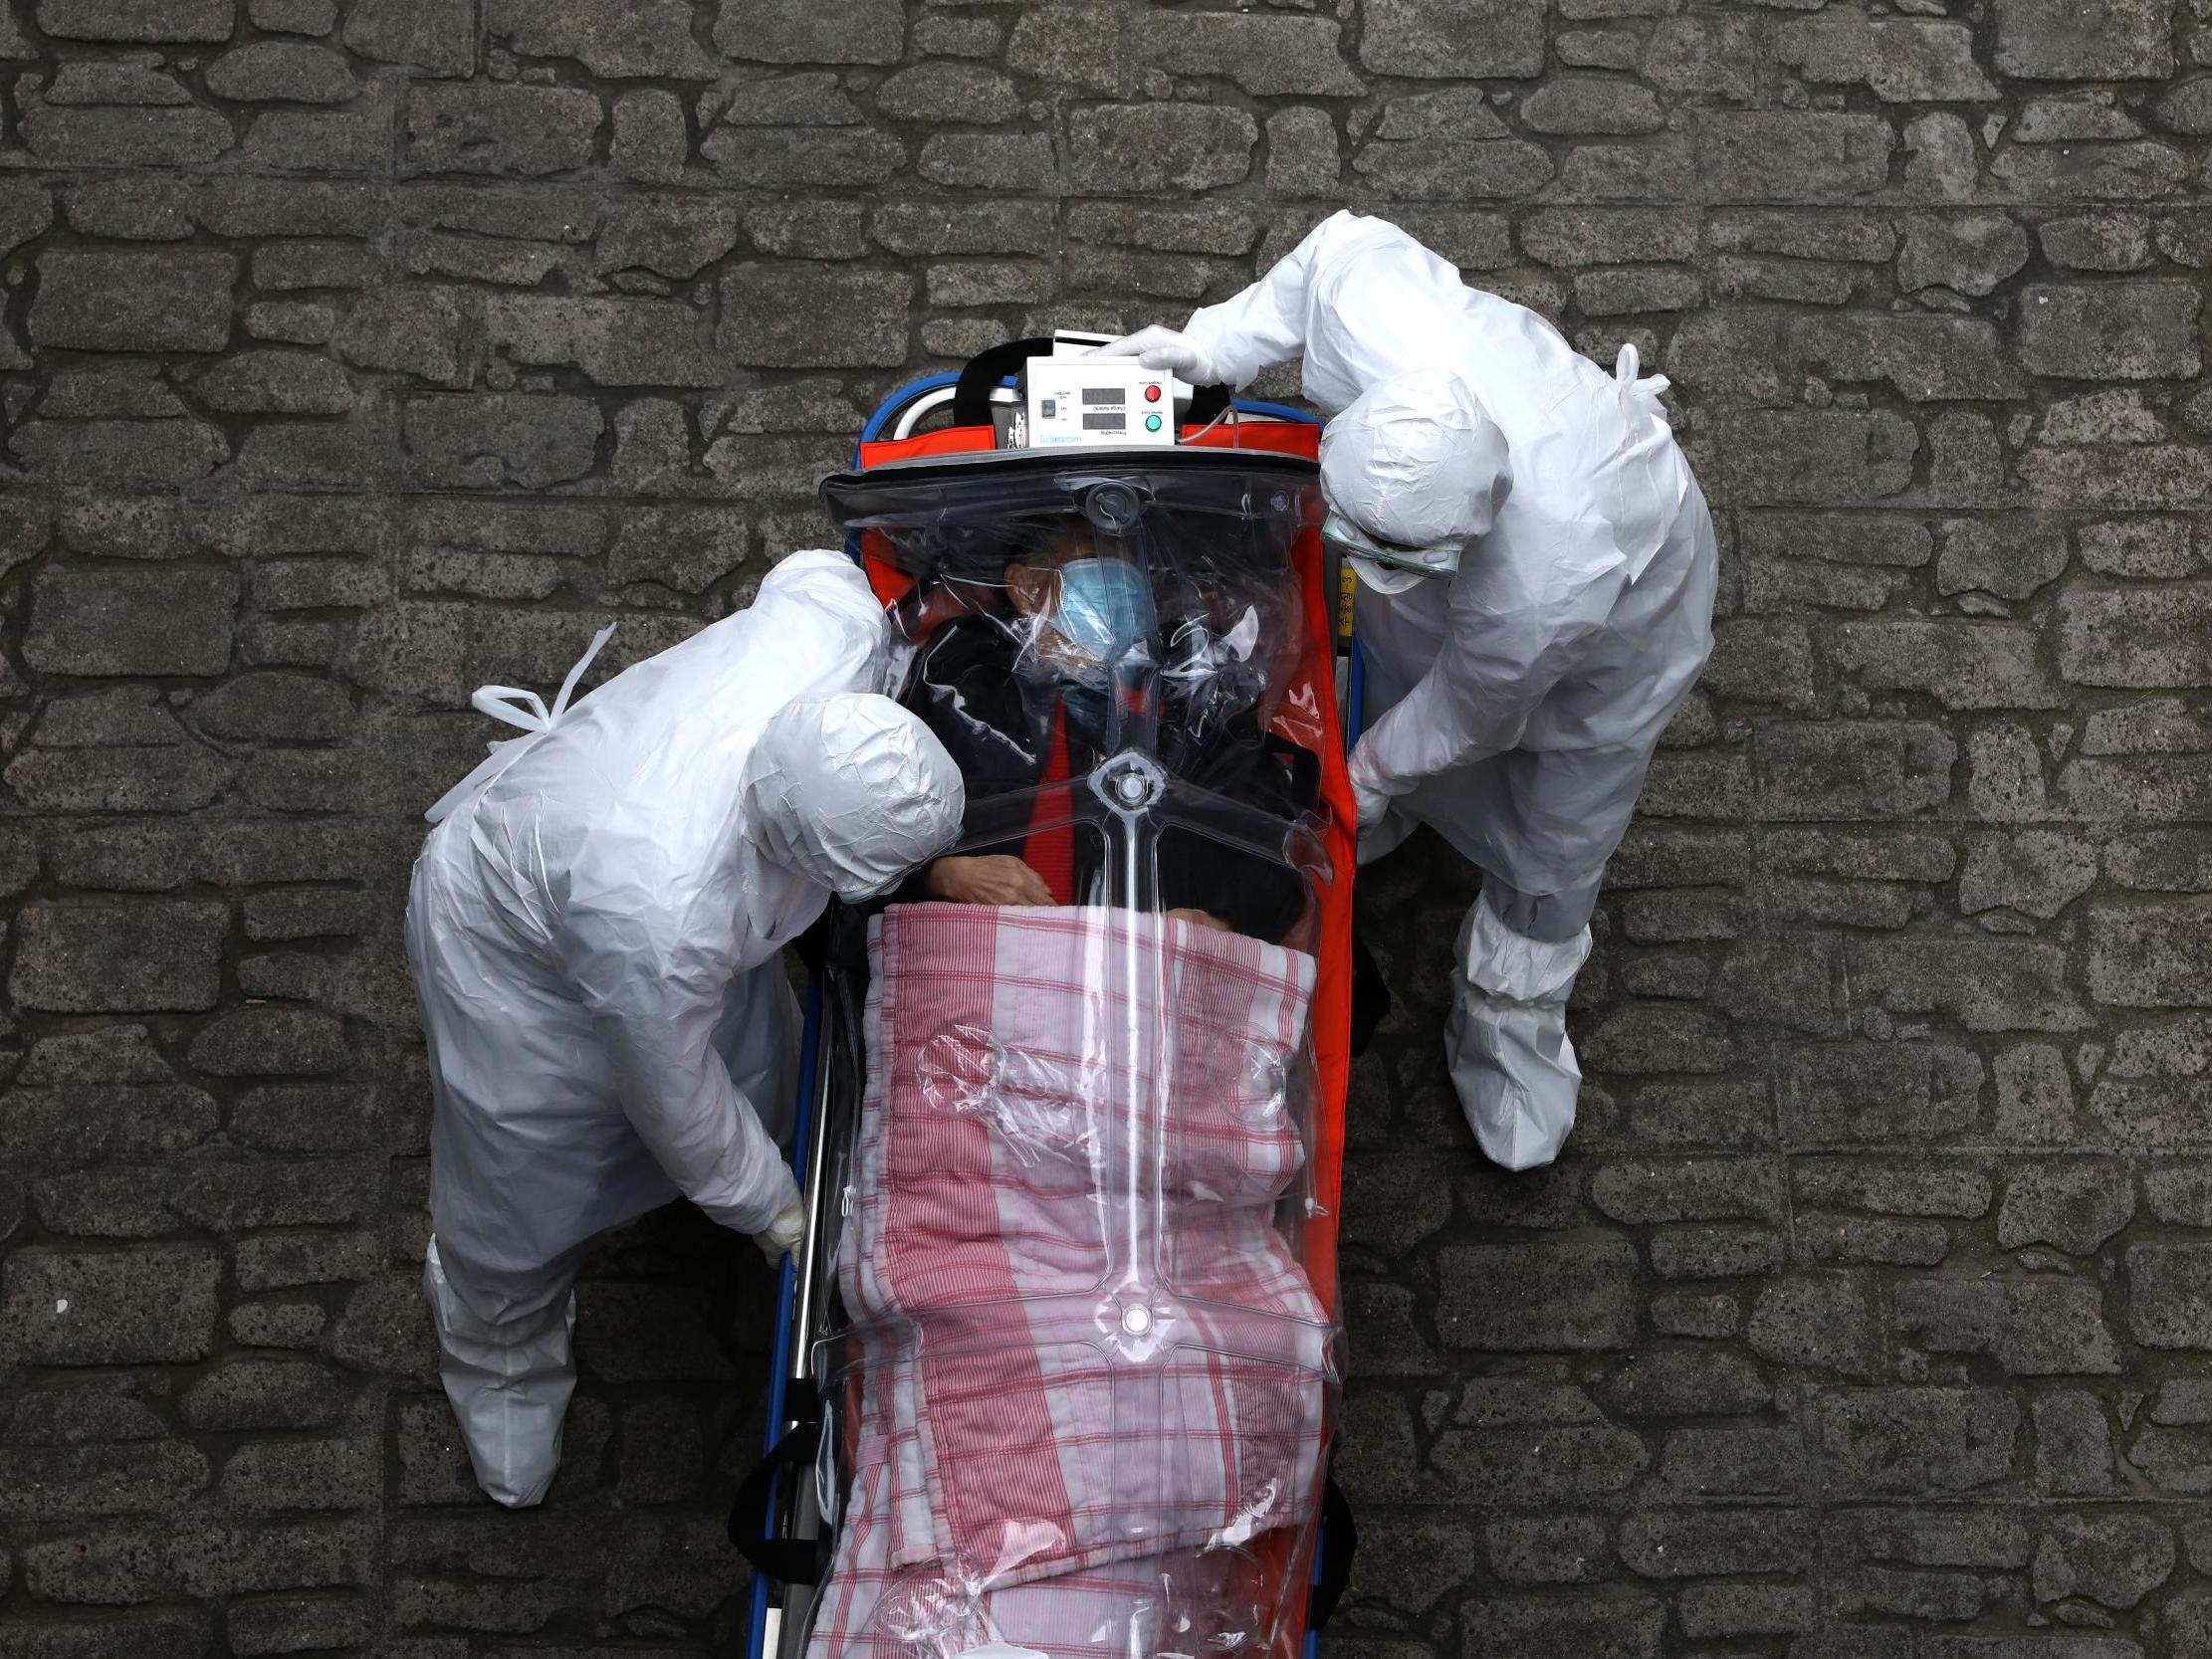 Healthcare workers move a patient infected with coronavirus from an ambulance to a hospital in Seoul